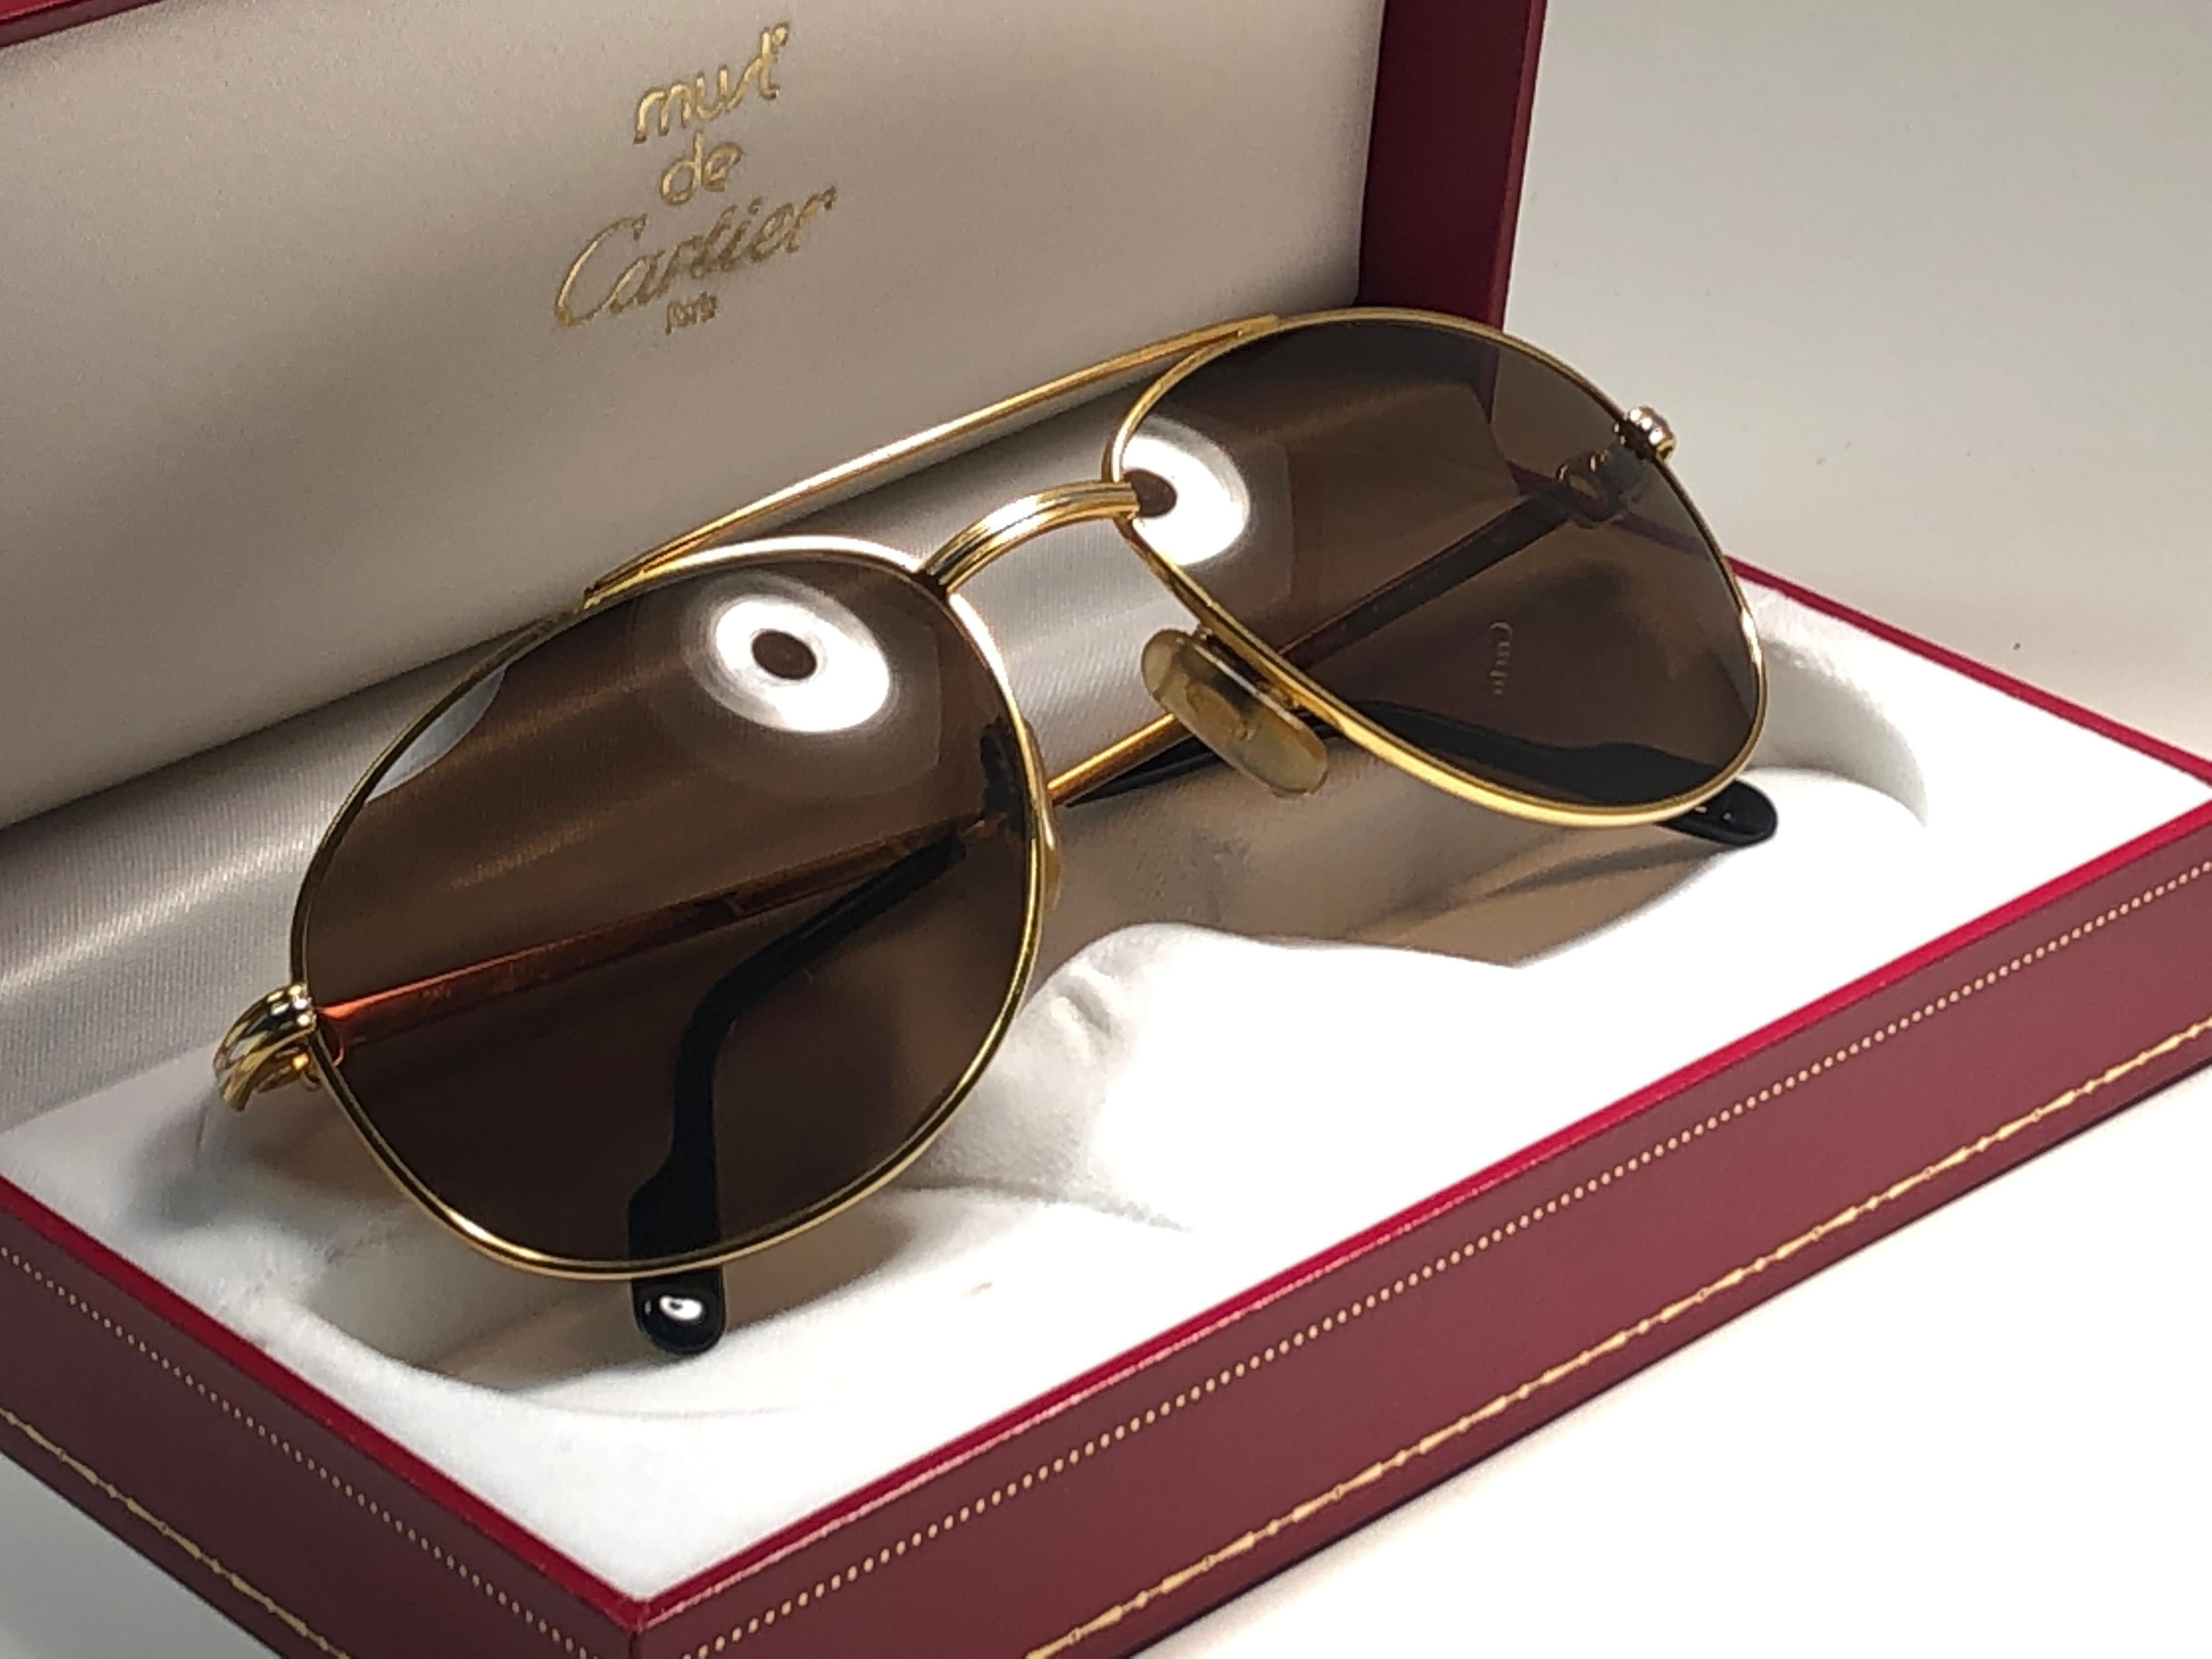 New condition 1990 Cartier Driver 60 [] 18 Sunglasses with brown (uv protection) lenses. All hallmarks. Cartier gold signs on the ear paddles. These are like a pair of jewels on your nose. 
Please notice that this sunglasses are nearly 30 years old